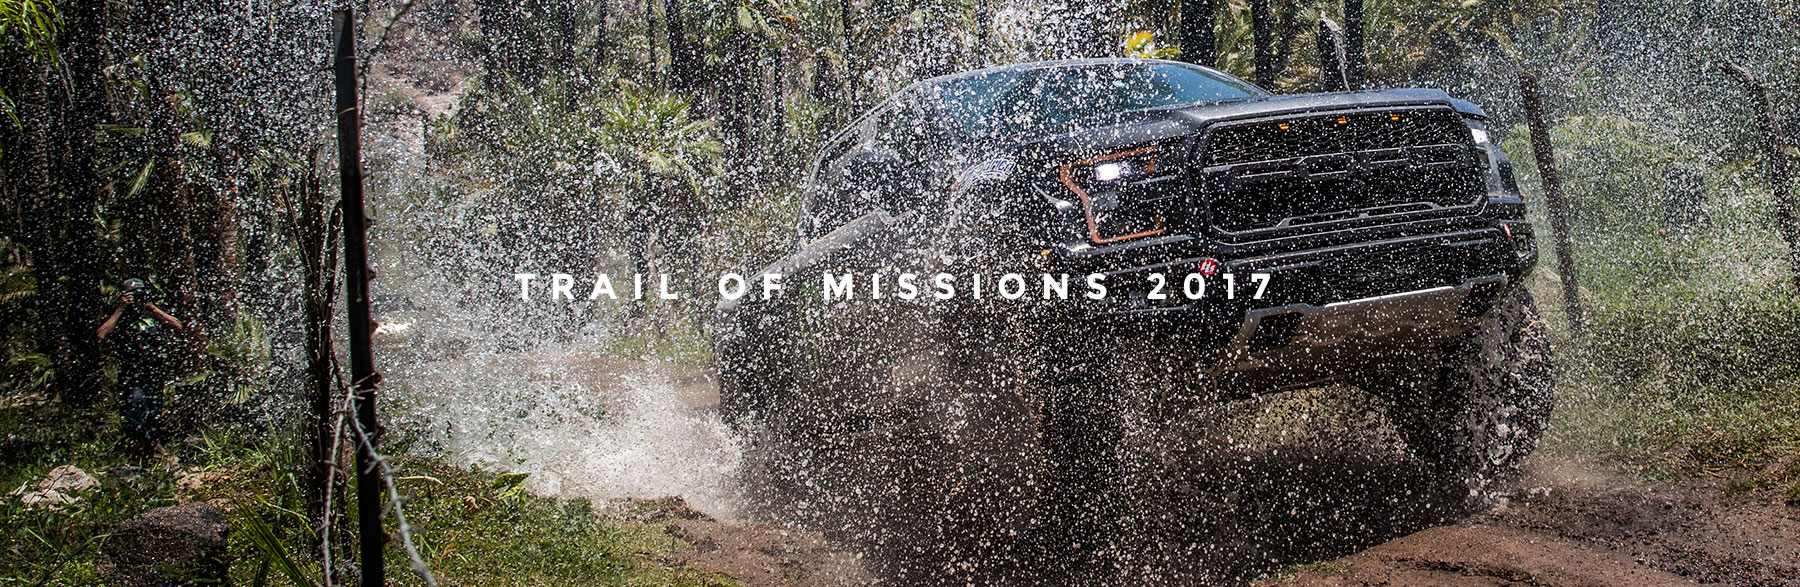 2017 Trail of Missions